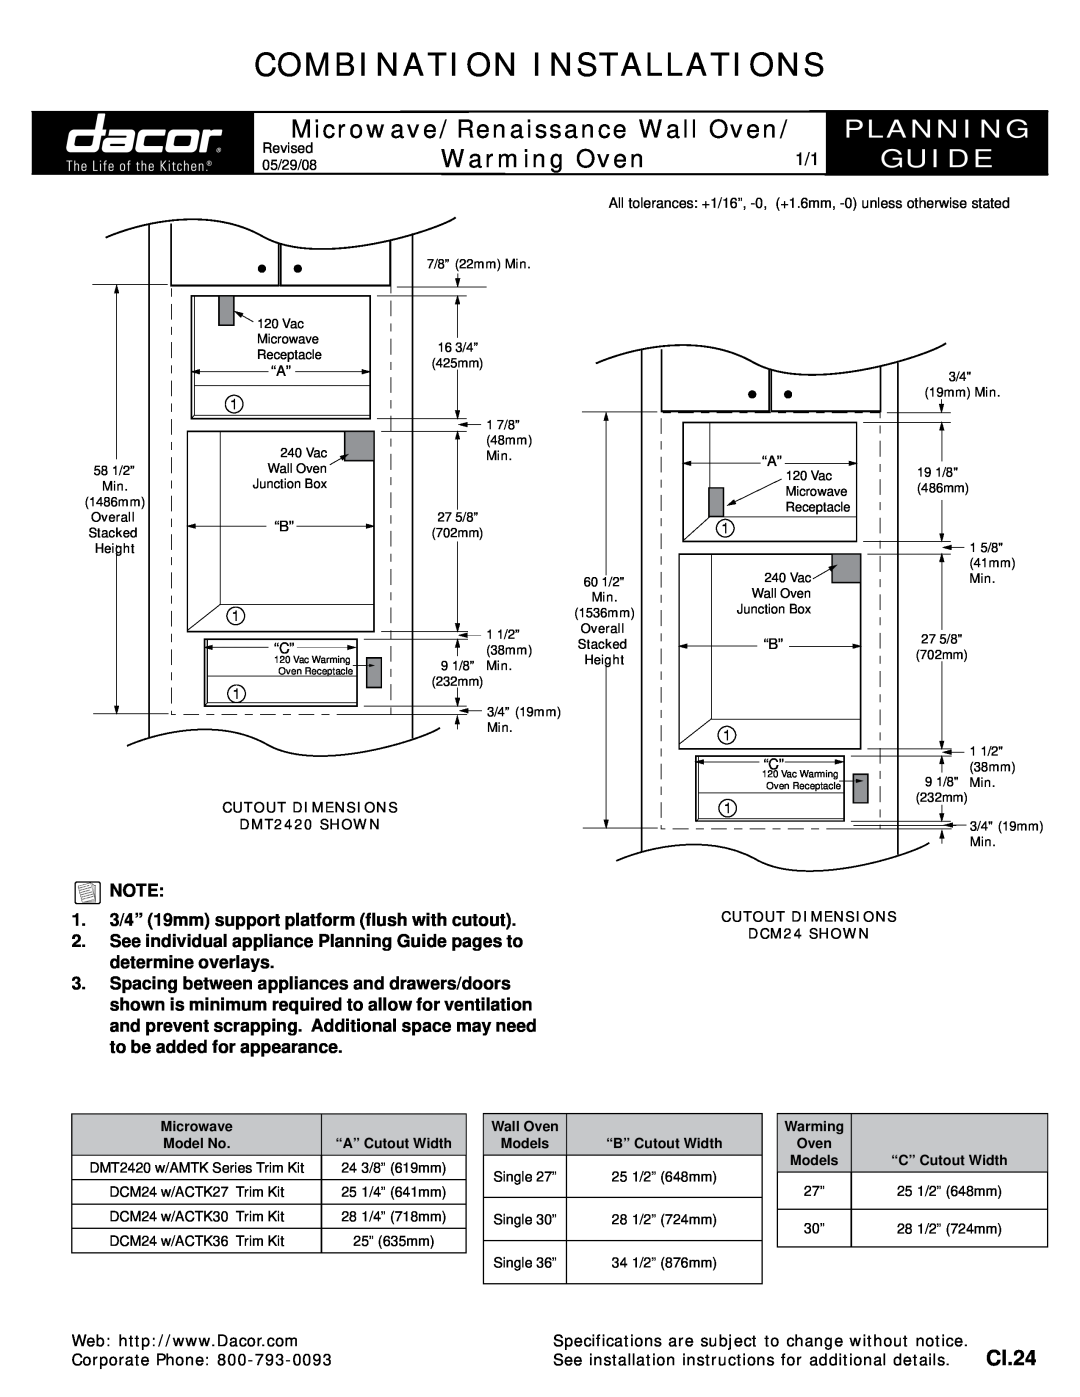 Dacor DMT2420 w/AMTK installation instructions Combination Installations, Microwave/Renaissance Wall Oven, Planning, Guide 